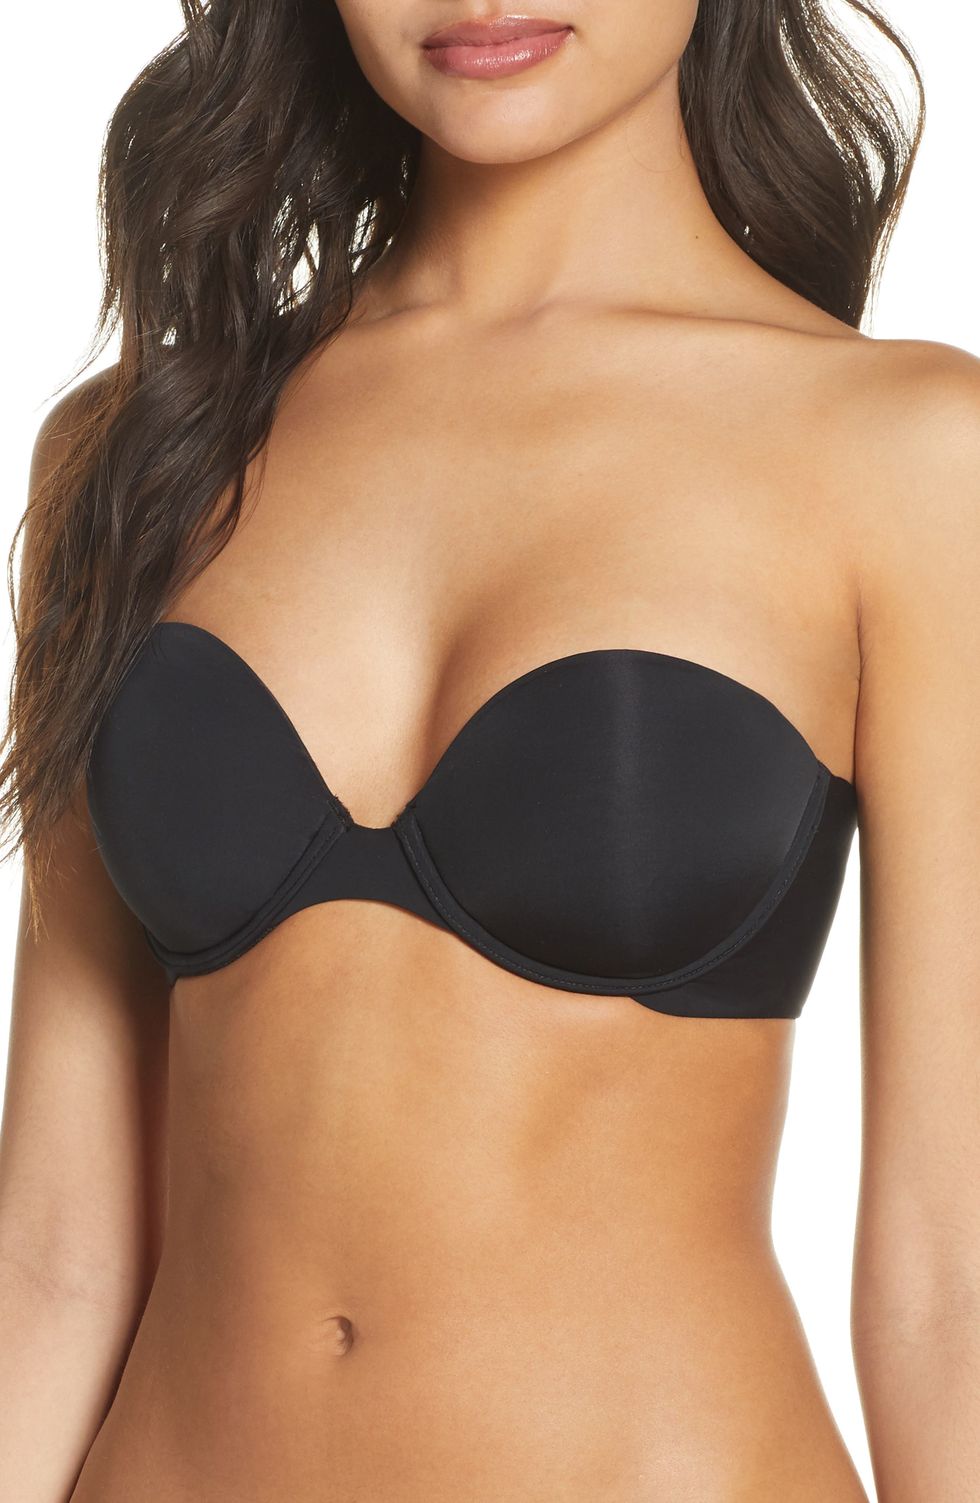 The 36 Best Strapless Bras That Won't Let You Down